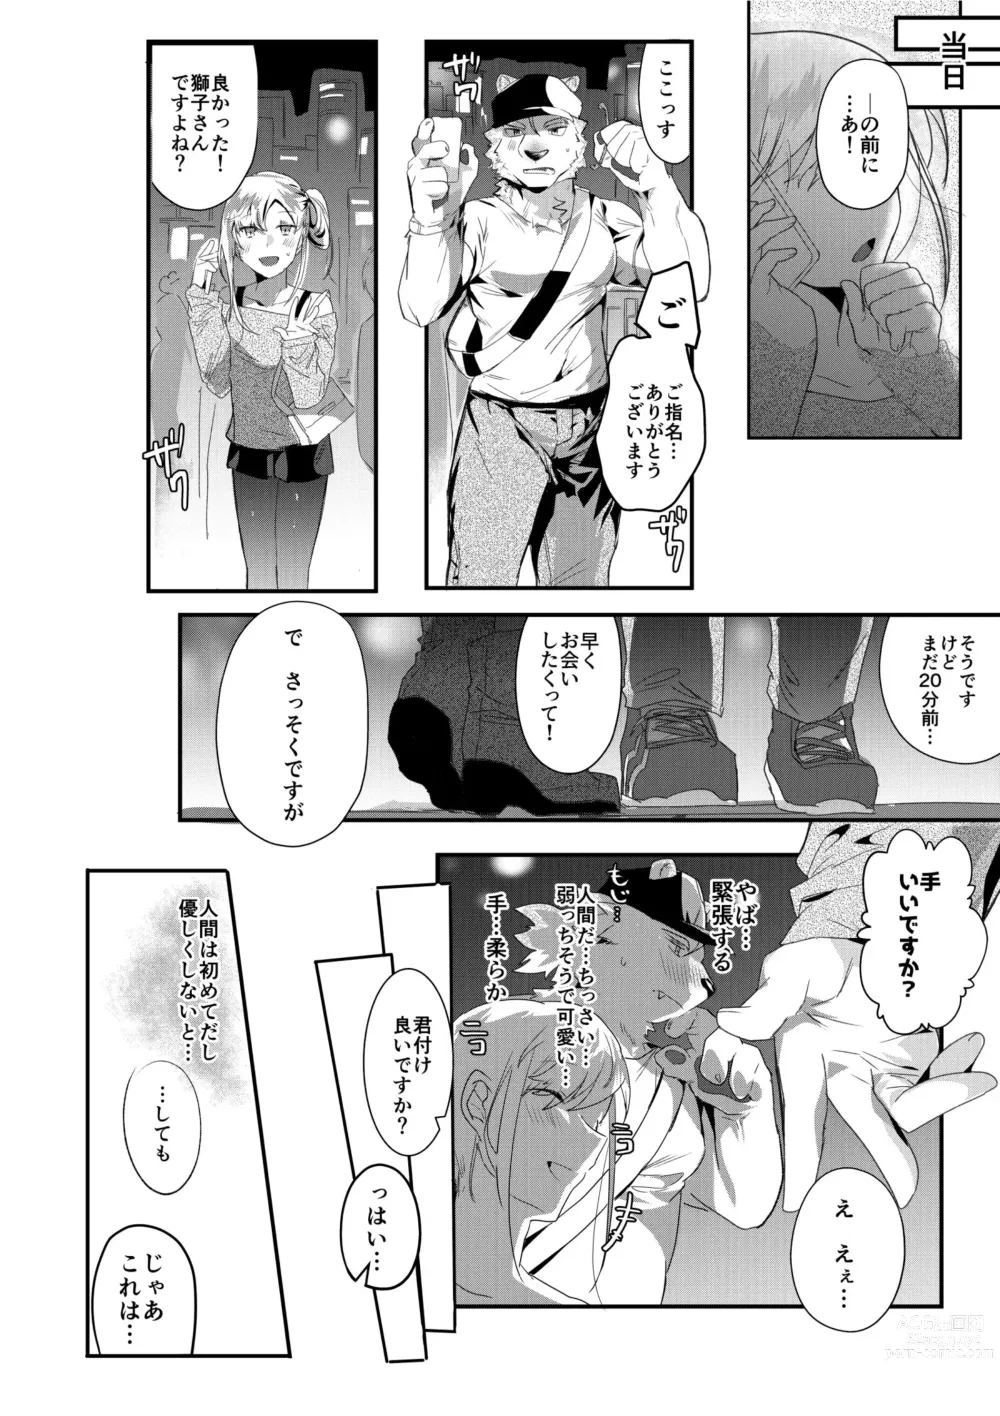 Page 3 of doujinshi Rental Lion to LoveHo